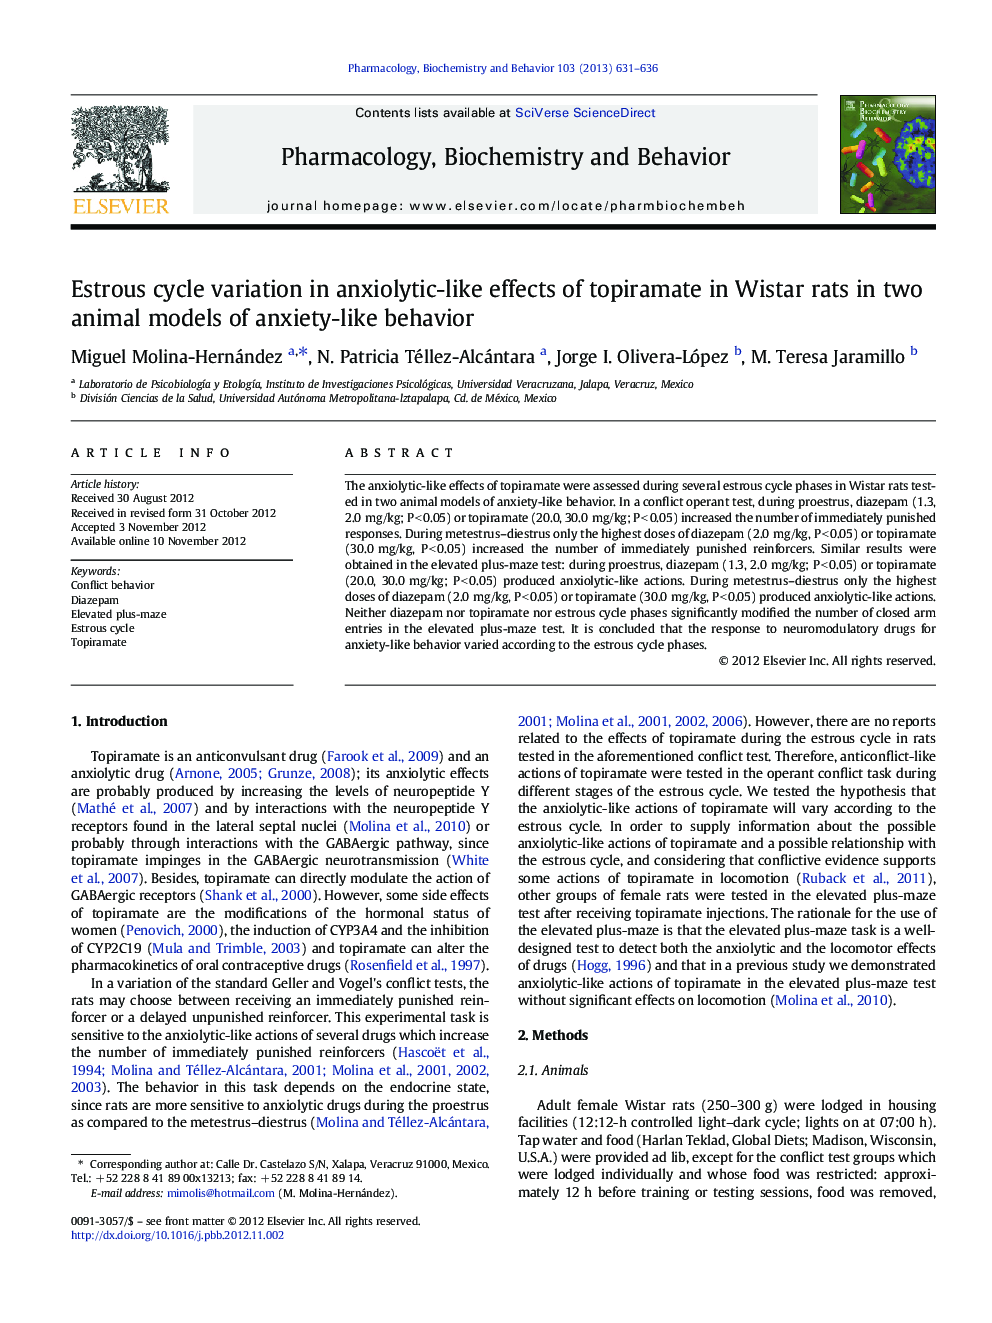 Estrous cycle variation in anxiolytic-like effects of topiramate in Wistar rats in two animal models of anxiety-like behavior